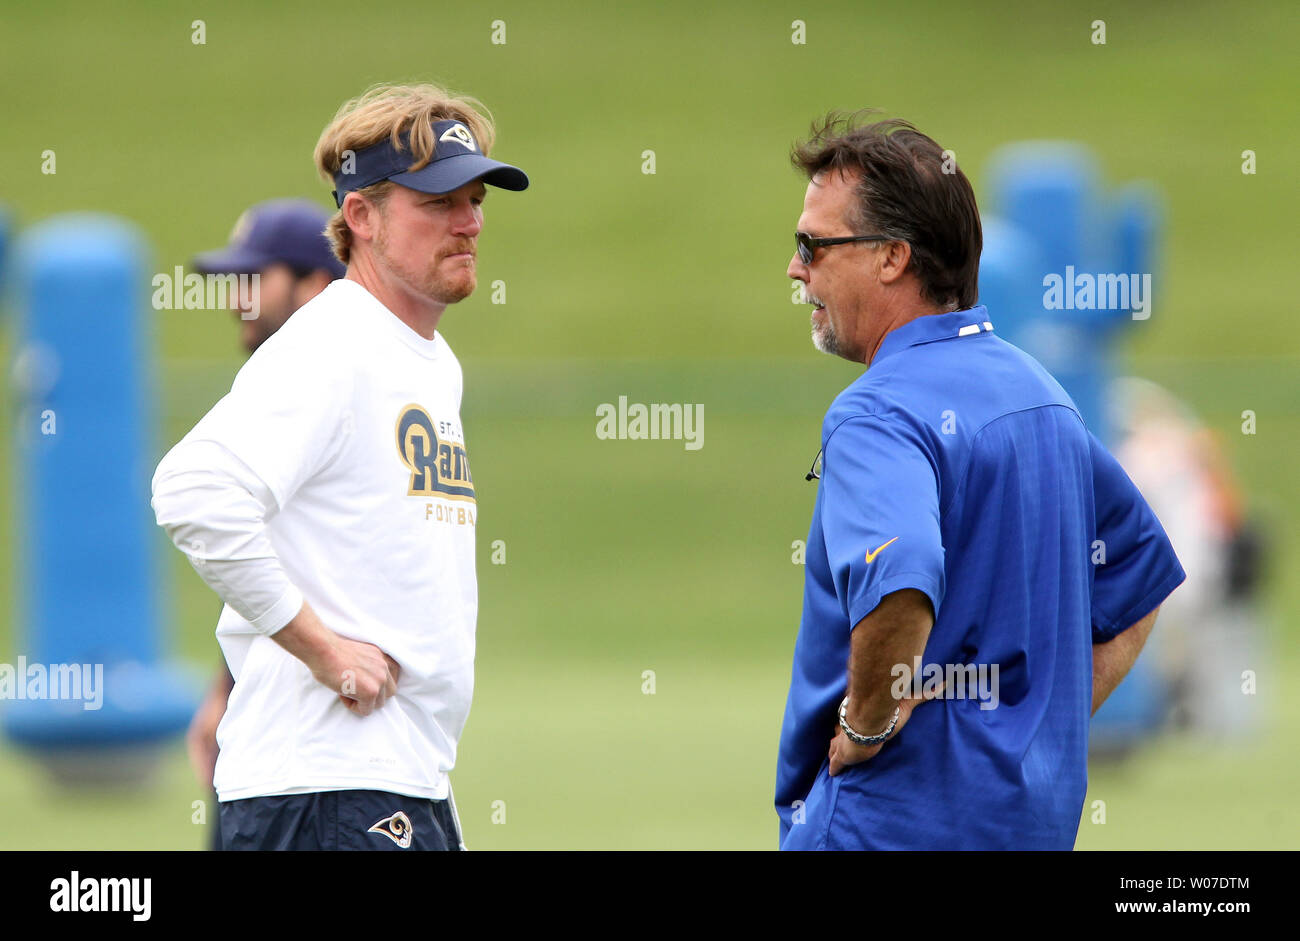 St. Louis Rams head football coach Jeff Fisher (R) talks with General Manager Les Snead during the first day of organized team activities at Rams Park in Earth City, Missouri on June 5, 2014.    UPI/Bill Greenblatt Stock Photo